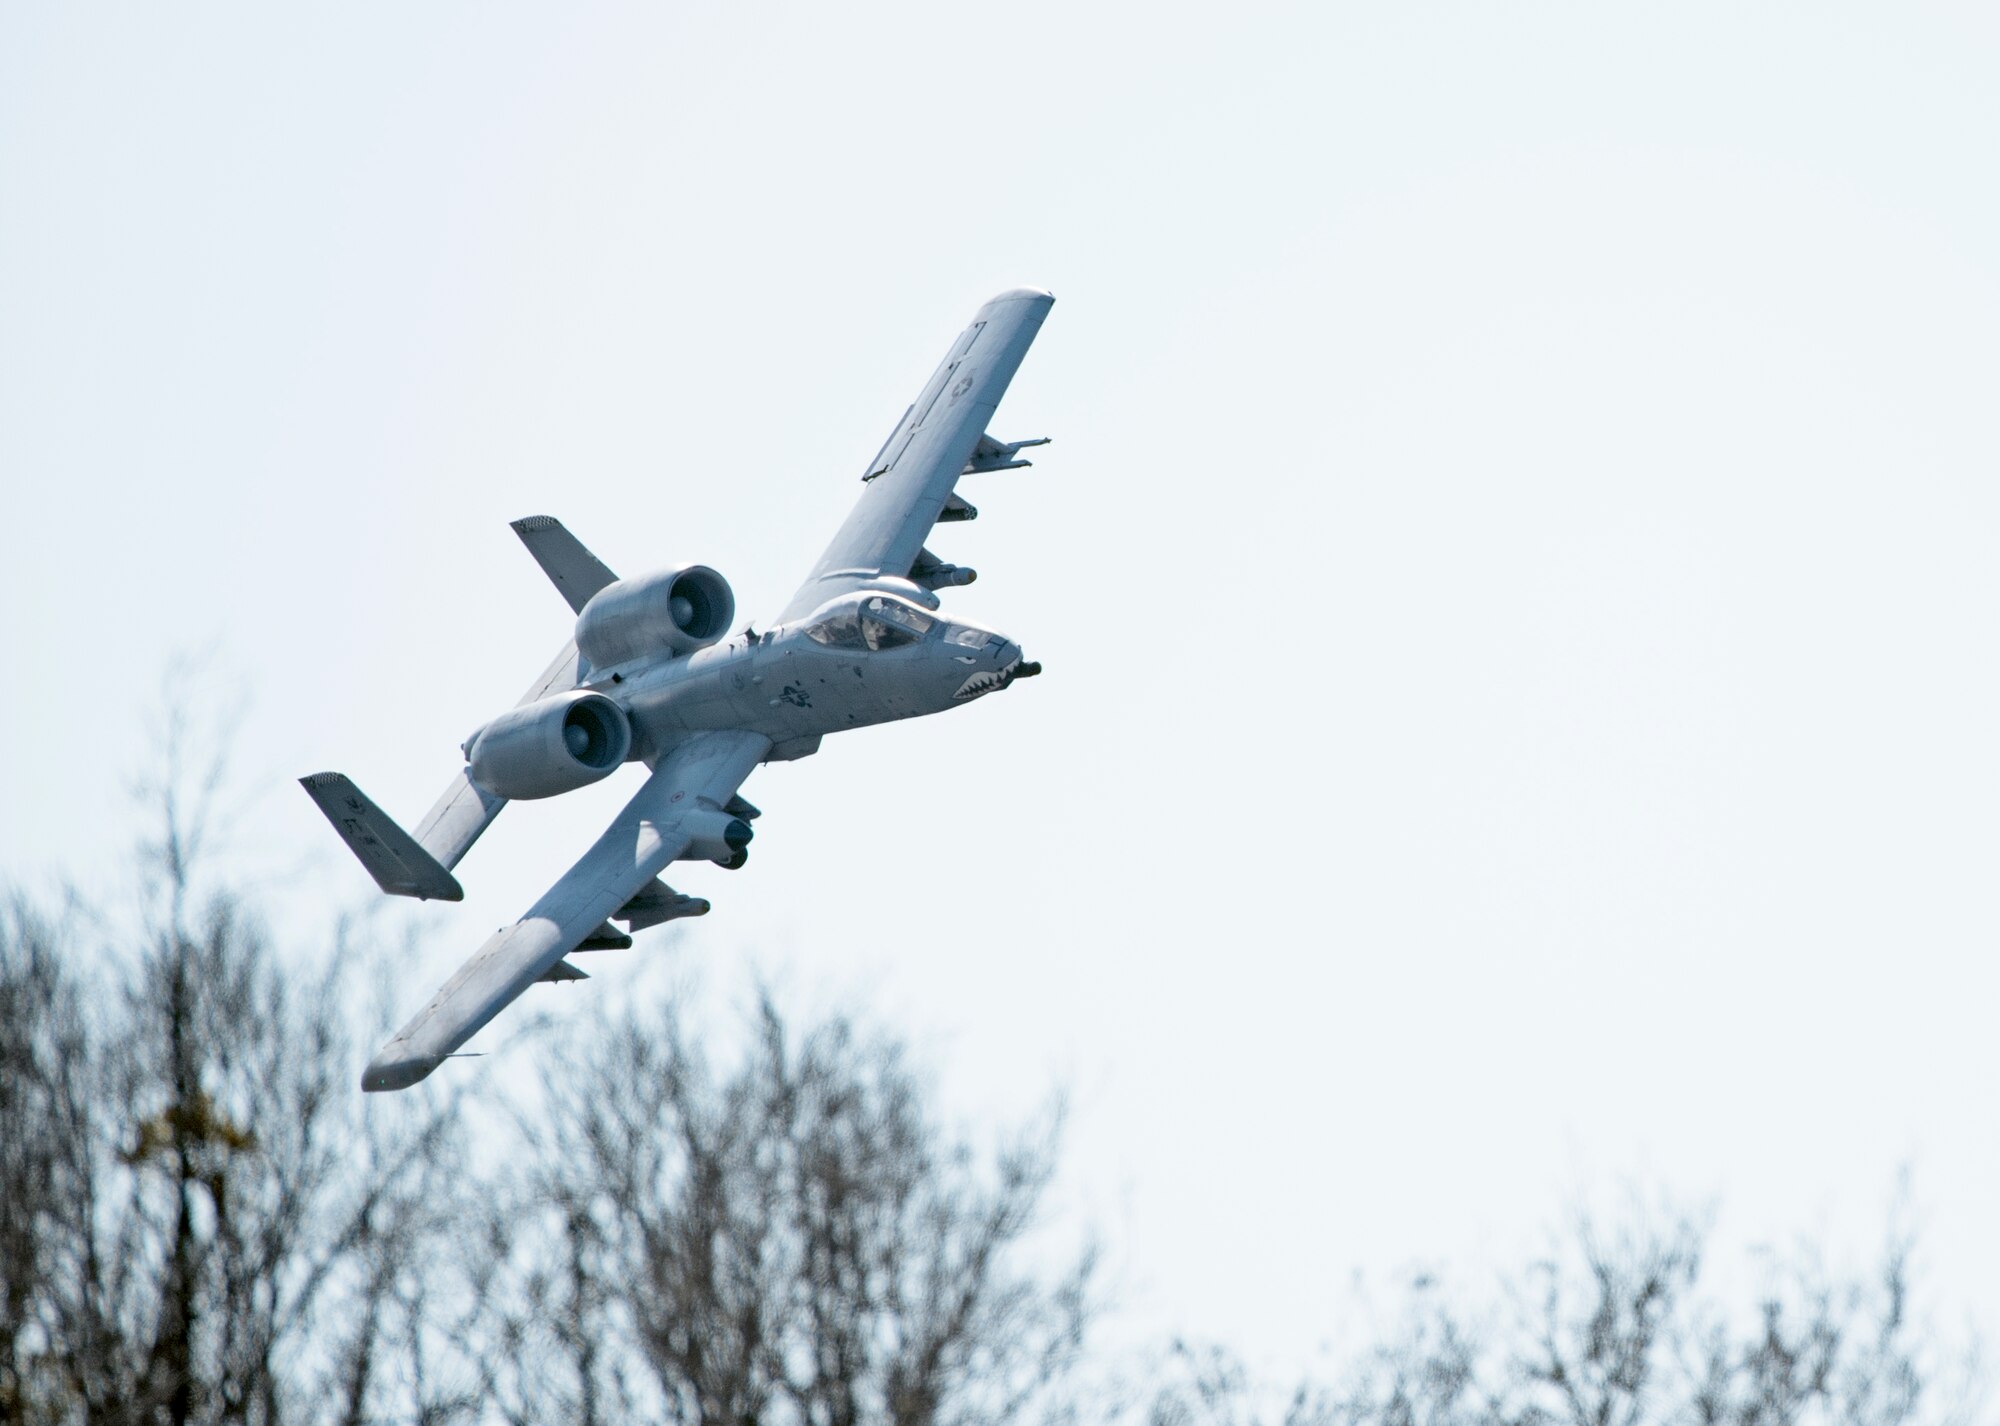 An A-10 Thunderbolt II flies over Grand Bay Bombing and Gunnery Range at Moody Air Force Base, Ga., Feb. 11, 2016. Multiple U.S. Air Force aircraft within Air Combat Command conducted joint aerial training that showcased the aircrafts tactical air and ground maneuvers, as well as its weapons capabilities. (U.S. Air Force photo by Staff Sgt. Brian J. Valencia/Released)